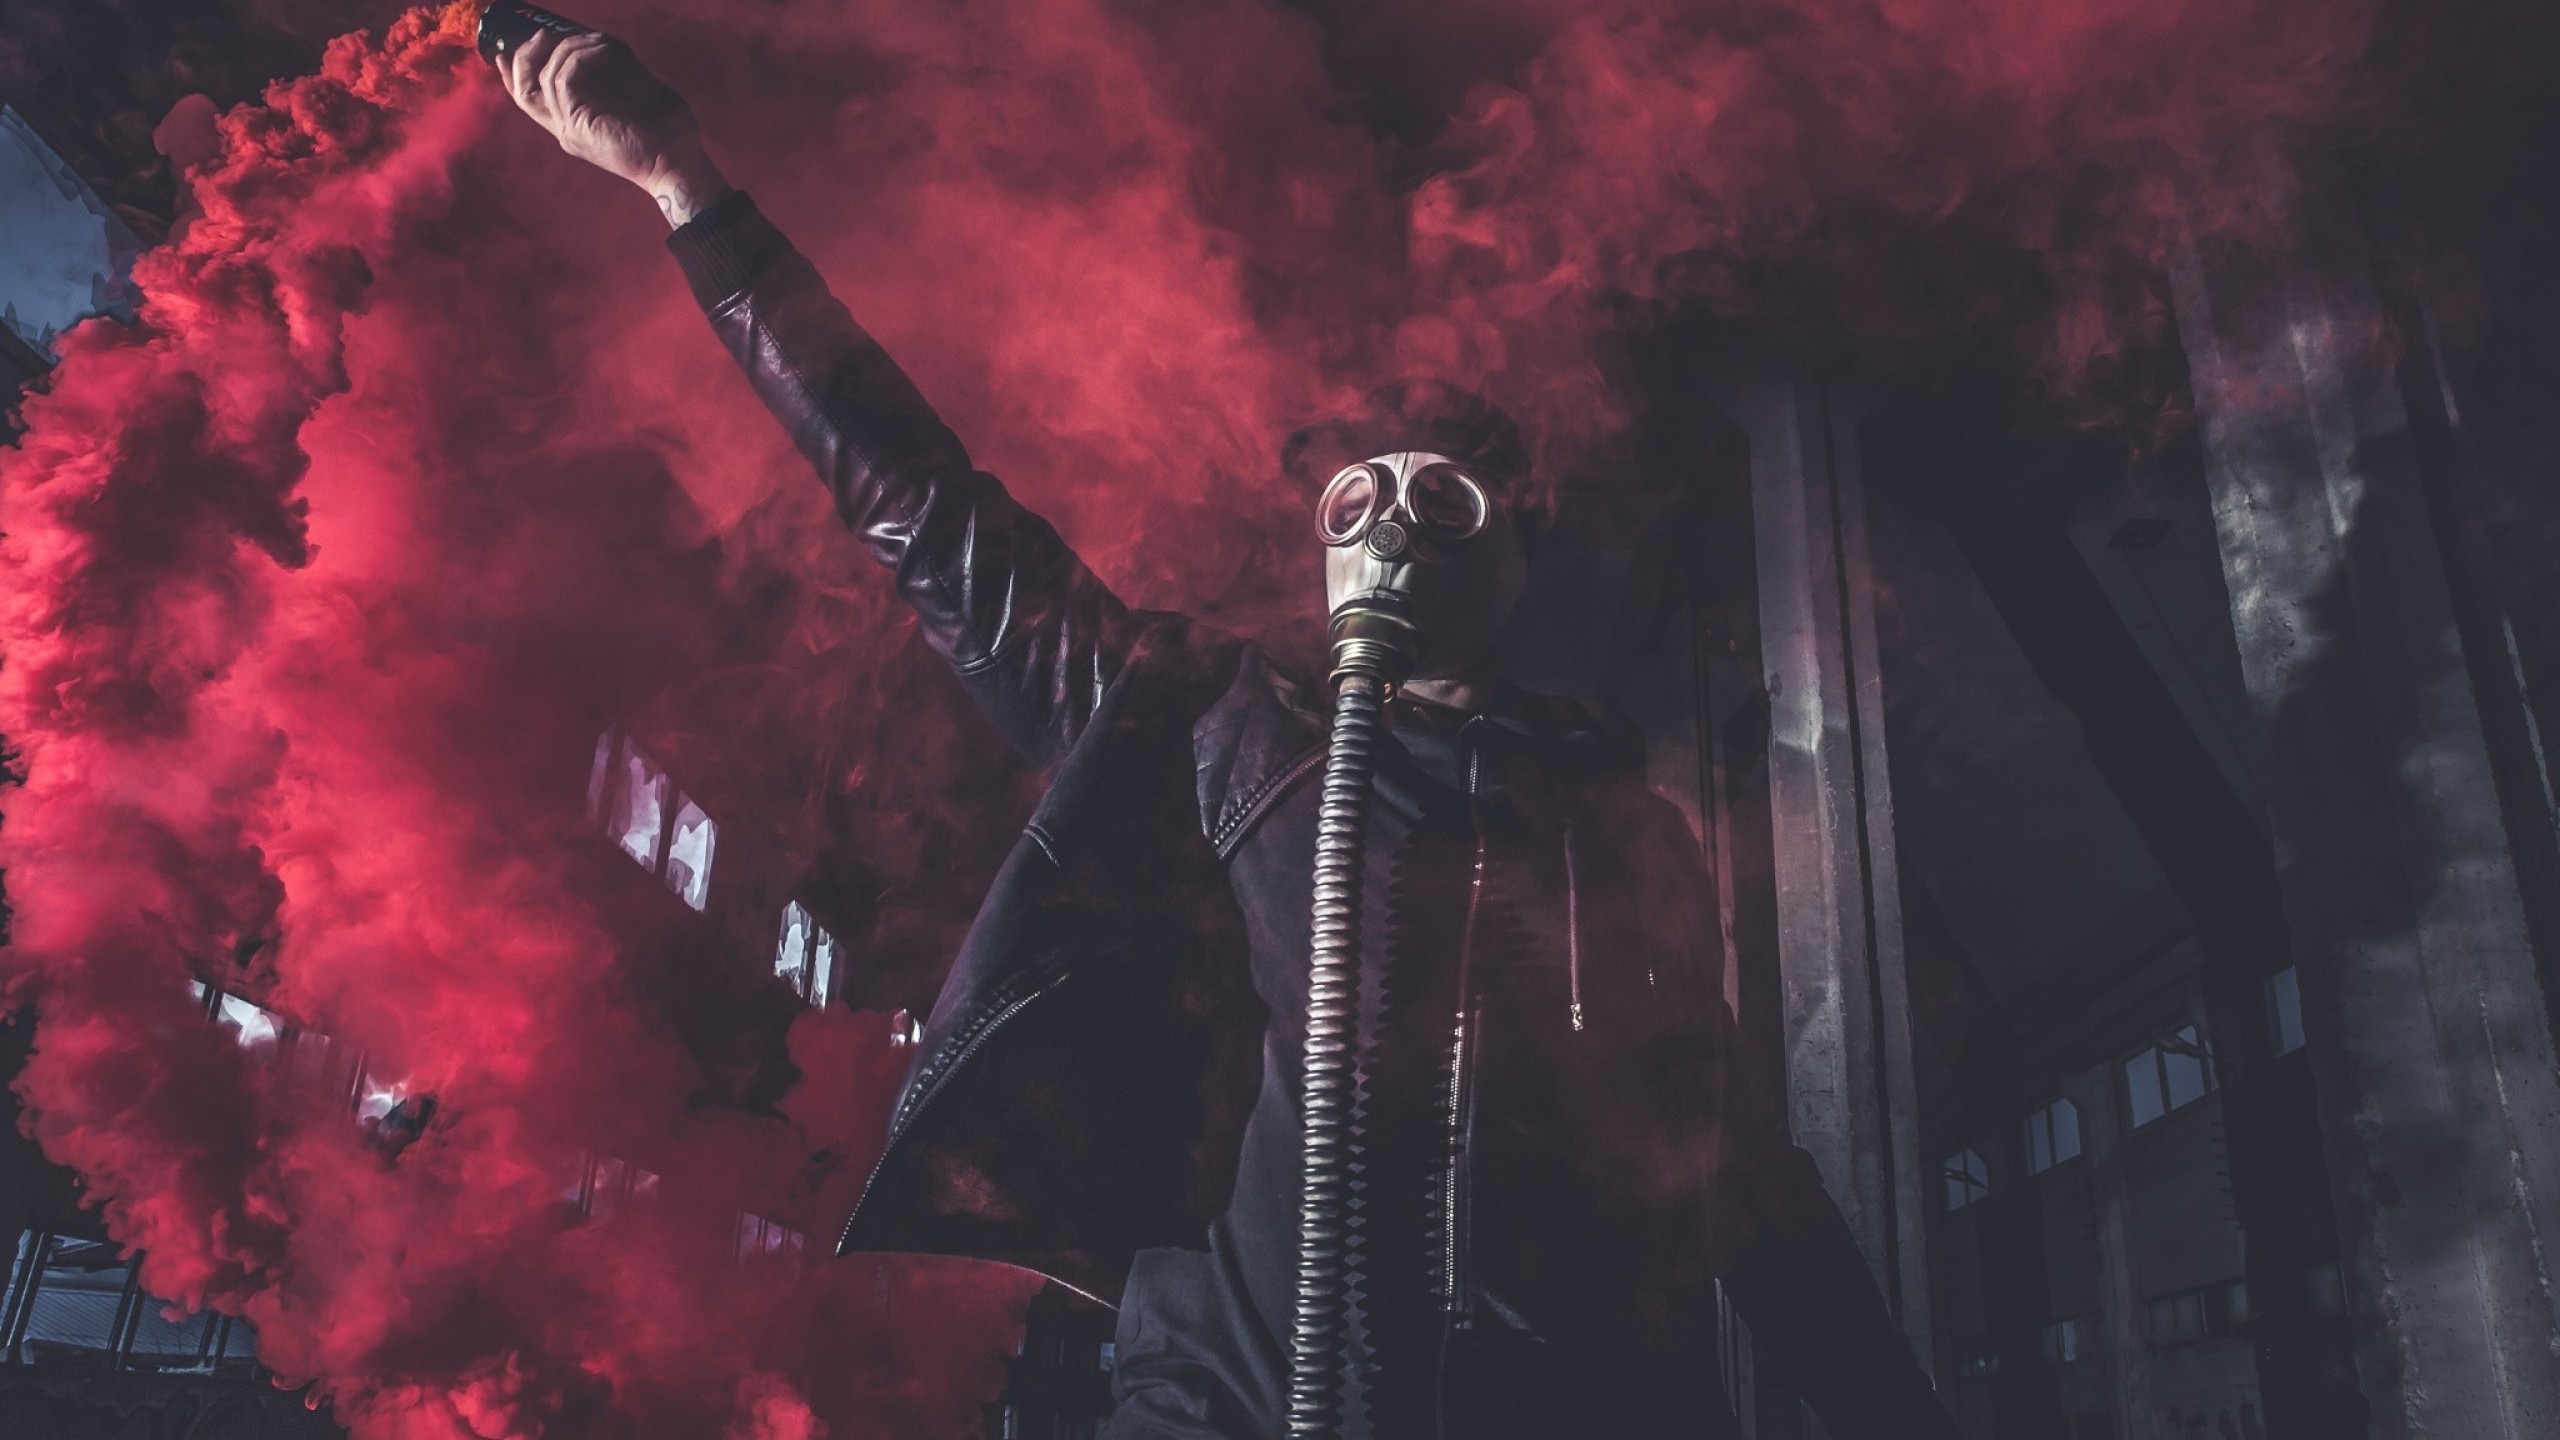 Download 2560x1440 Red Smoke, Gas Mask, Men, Inside Wallpapers for ...